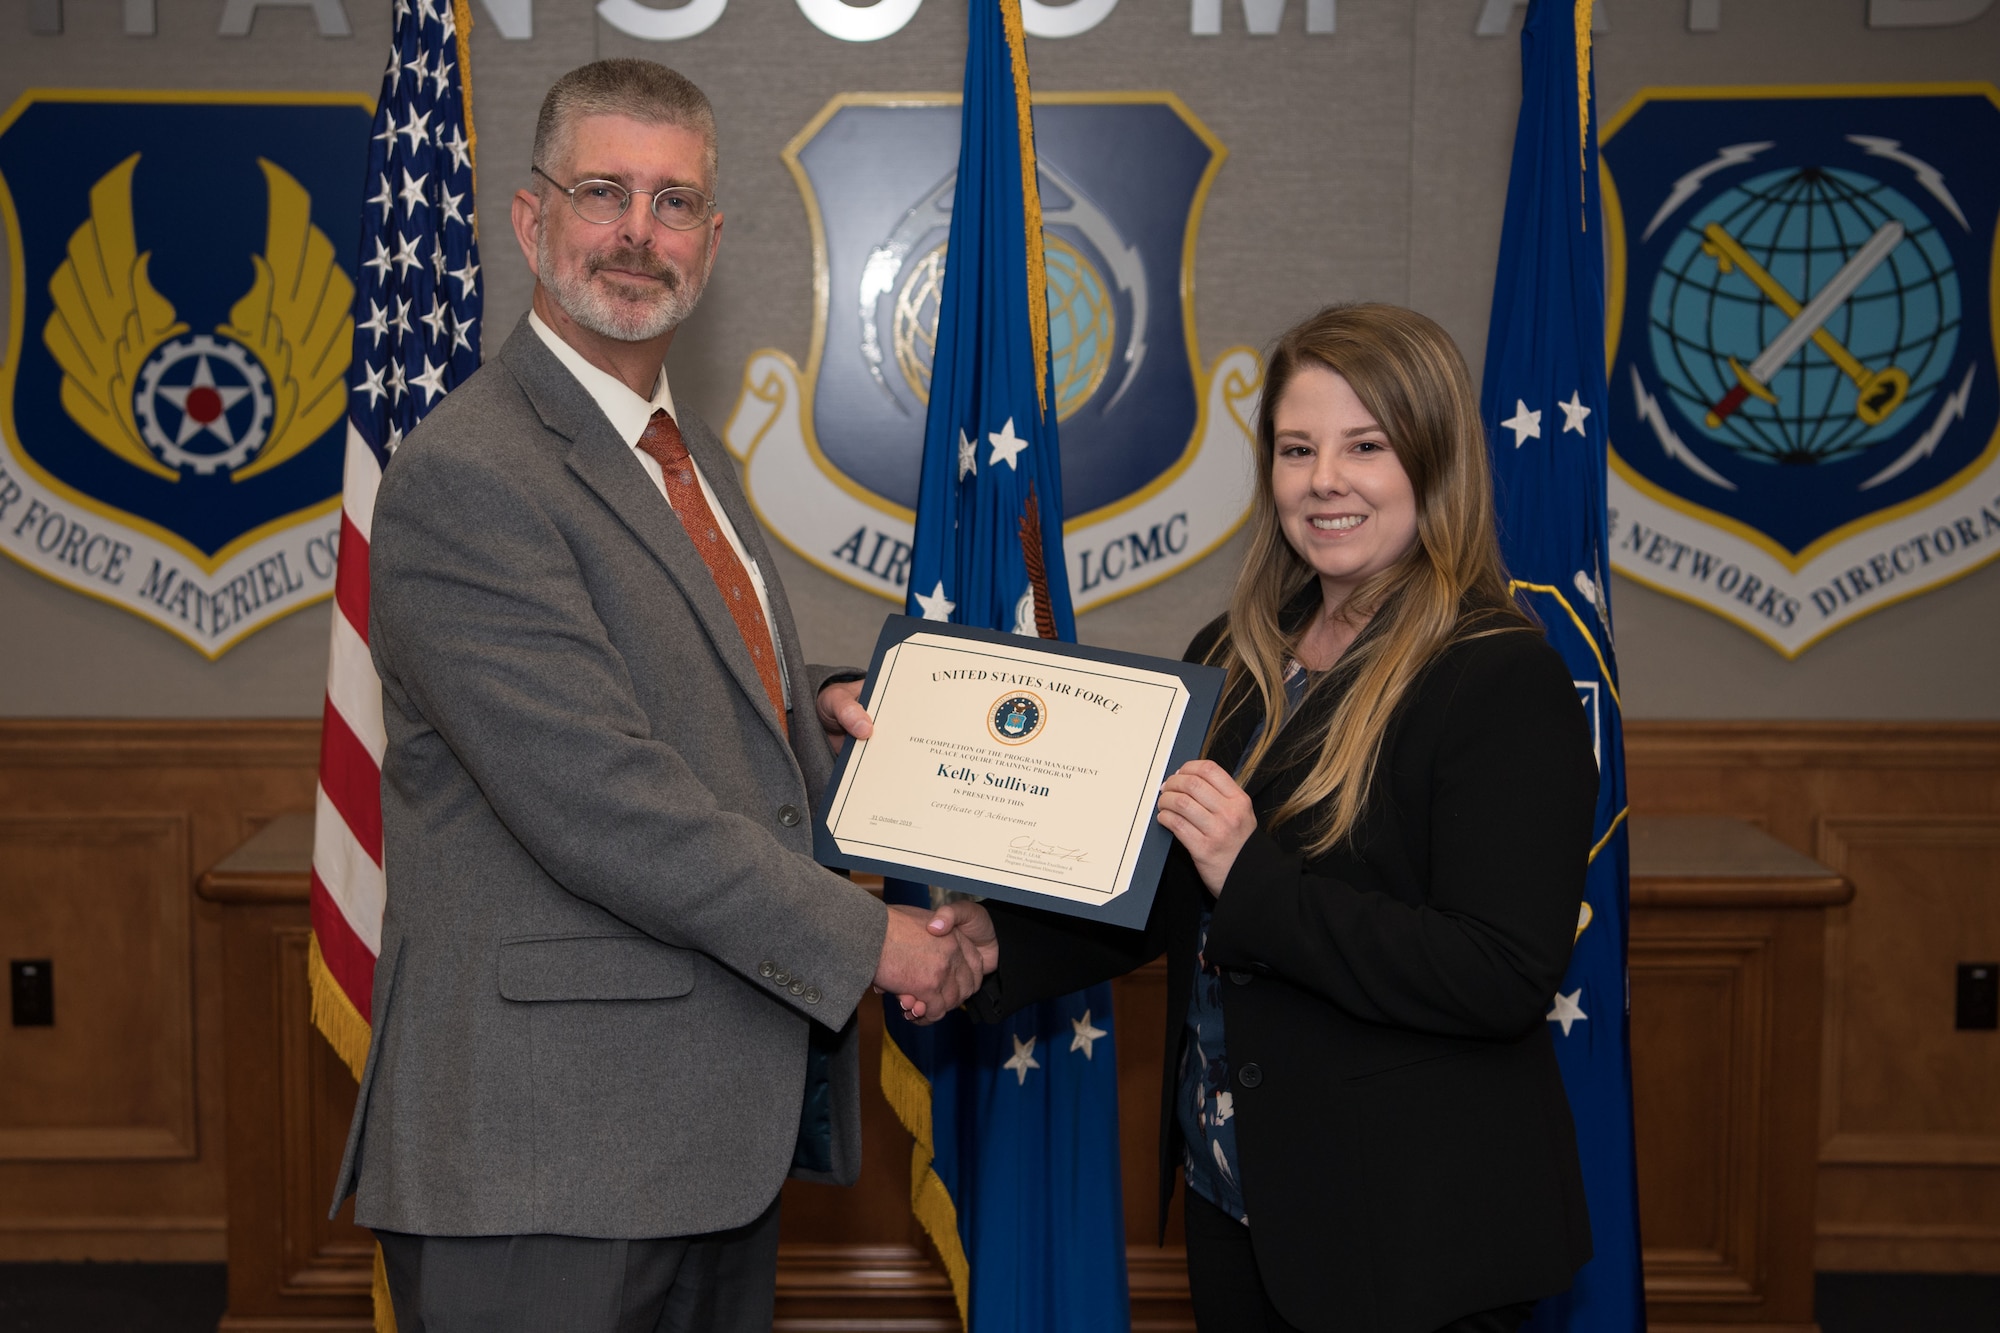 Kelly Sullivan, a PALACE Acquire graduate and program manager for the Digital Directorate, receives a certificate from Scott Owens, deputy director of Command, Control, Communications, Intelligence and Networks, during a graduation ceremony for program management trainees at Hanscom Air Force Base, Mass., Dec. 5.